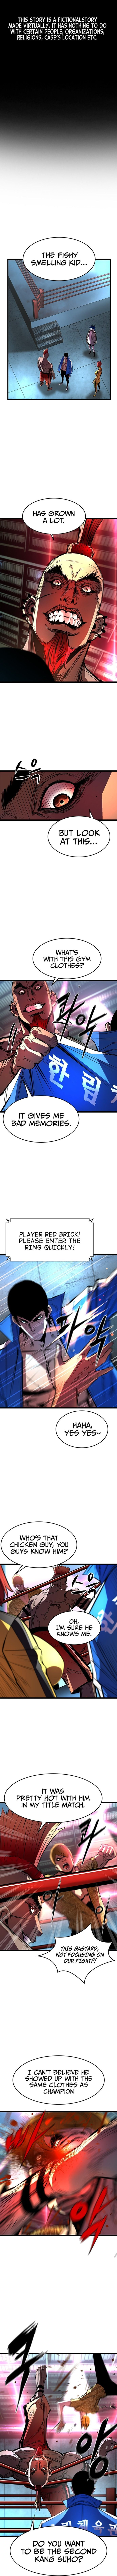 Hanlim Gym Chapter 90 page 1